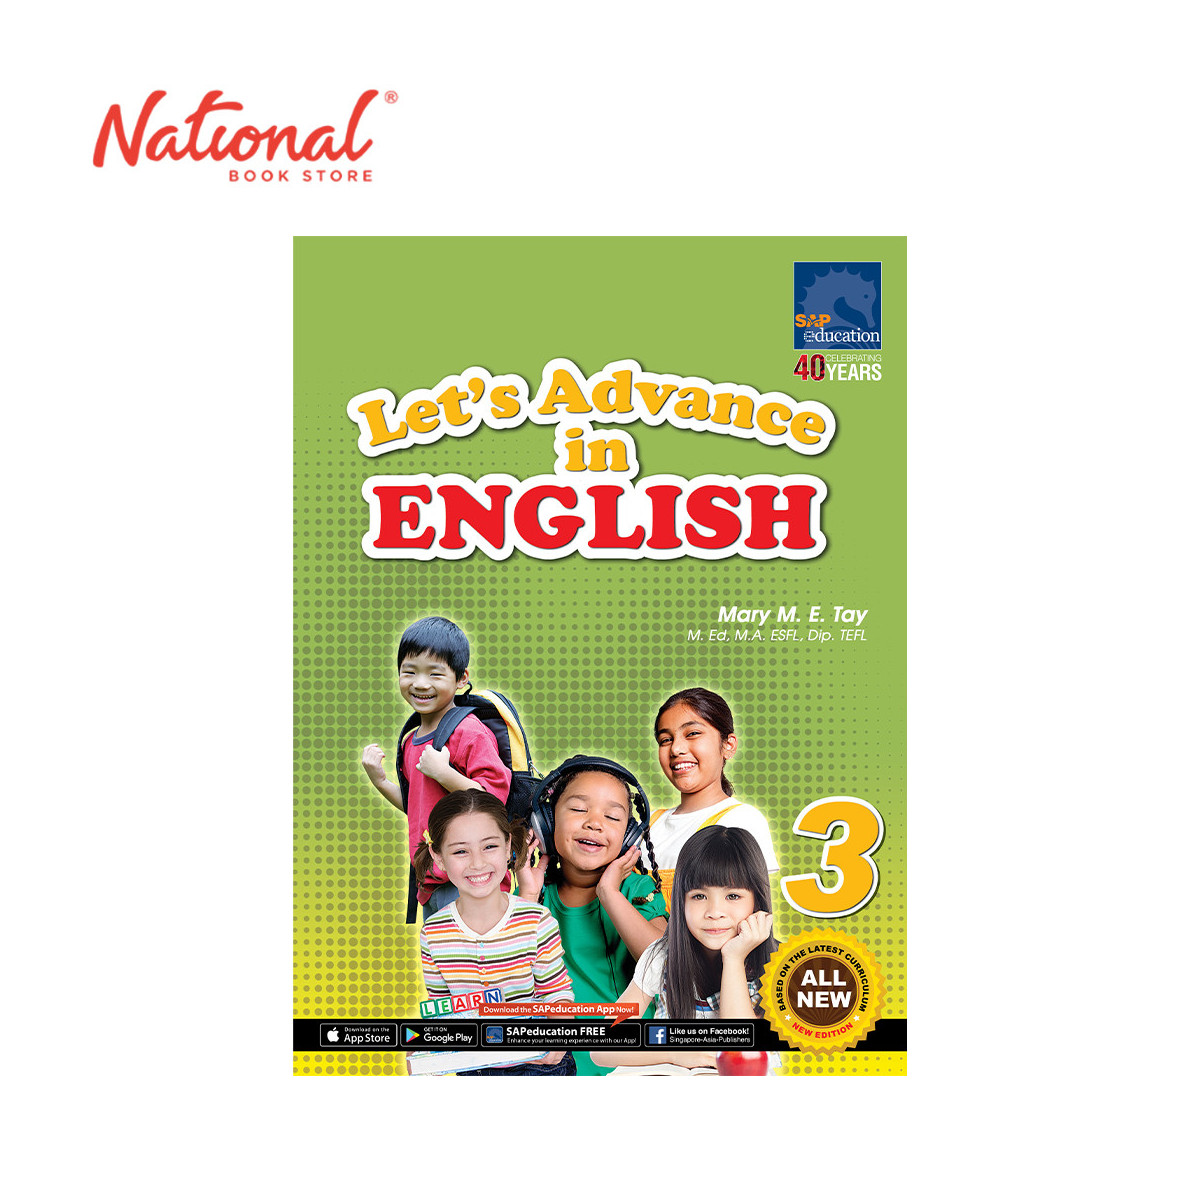 Let's Advance in English 3 by Mary Tay - Trade Paperback - Elementary Books